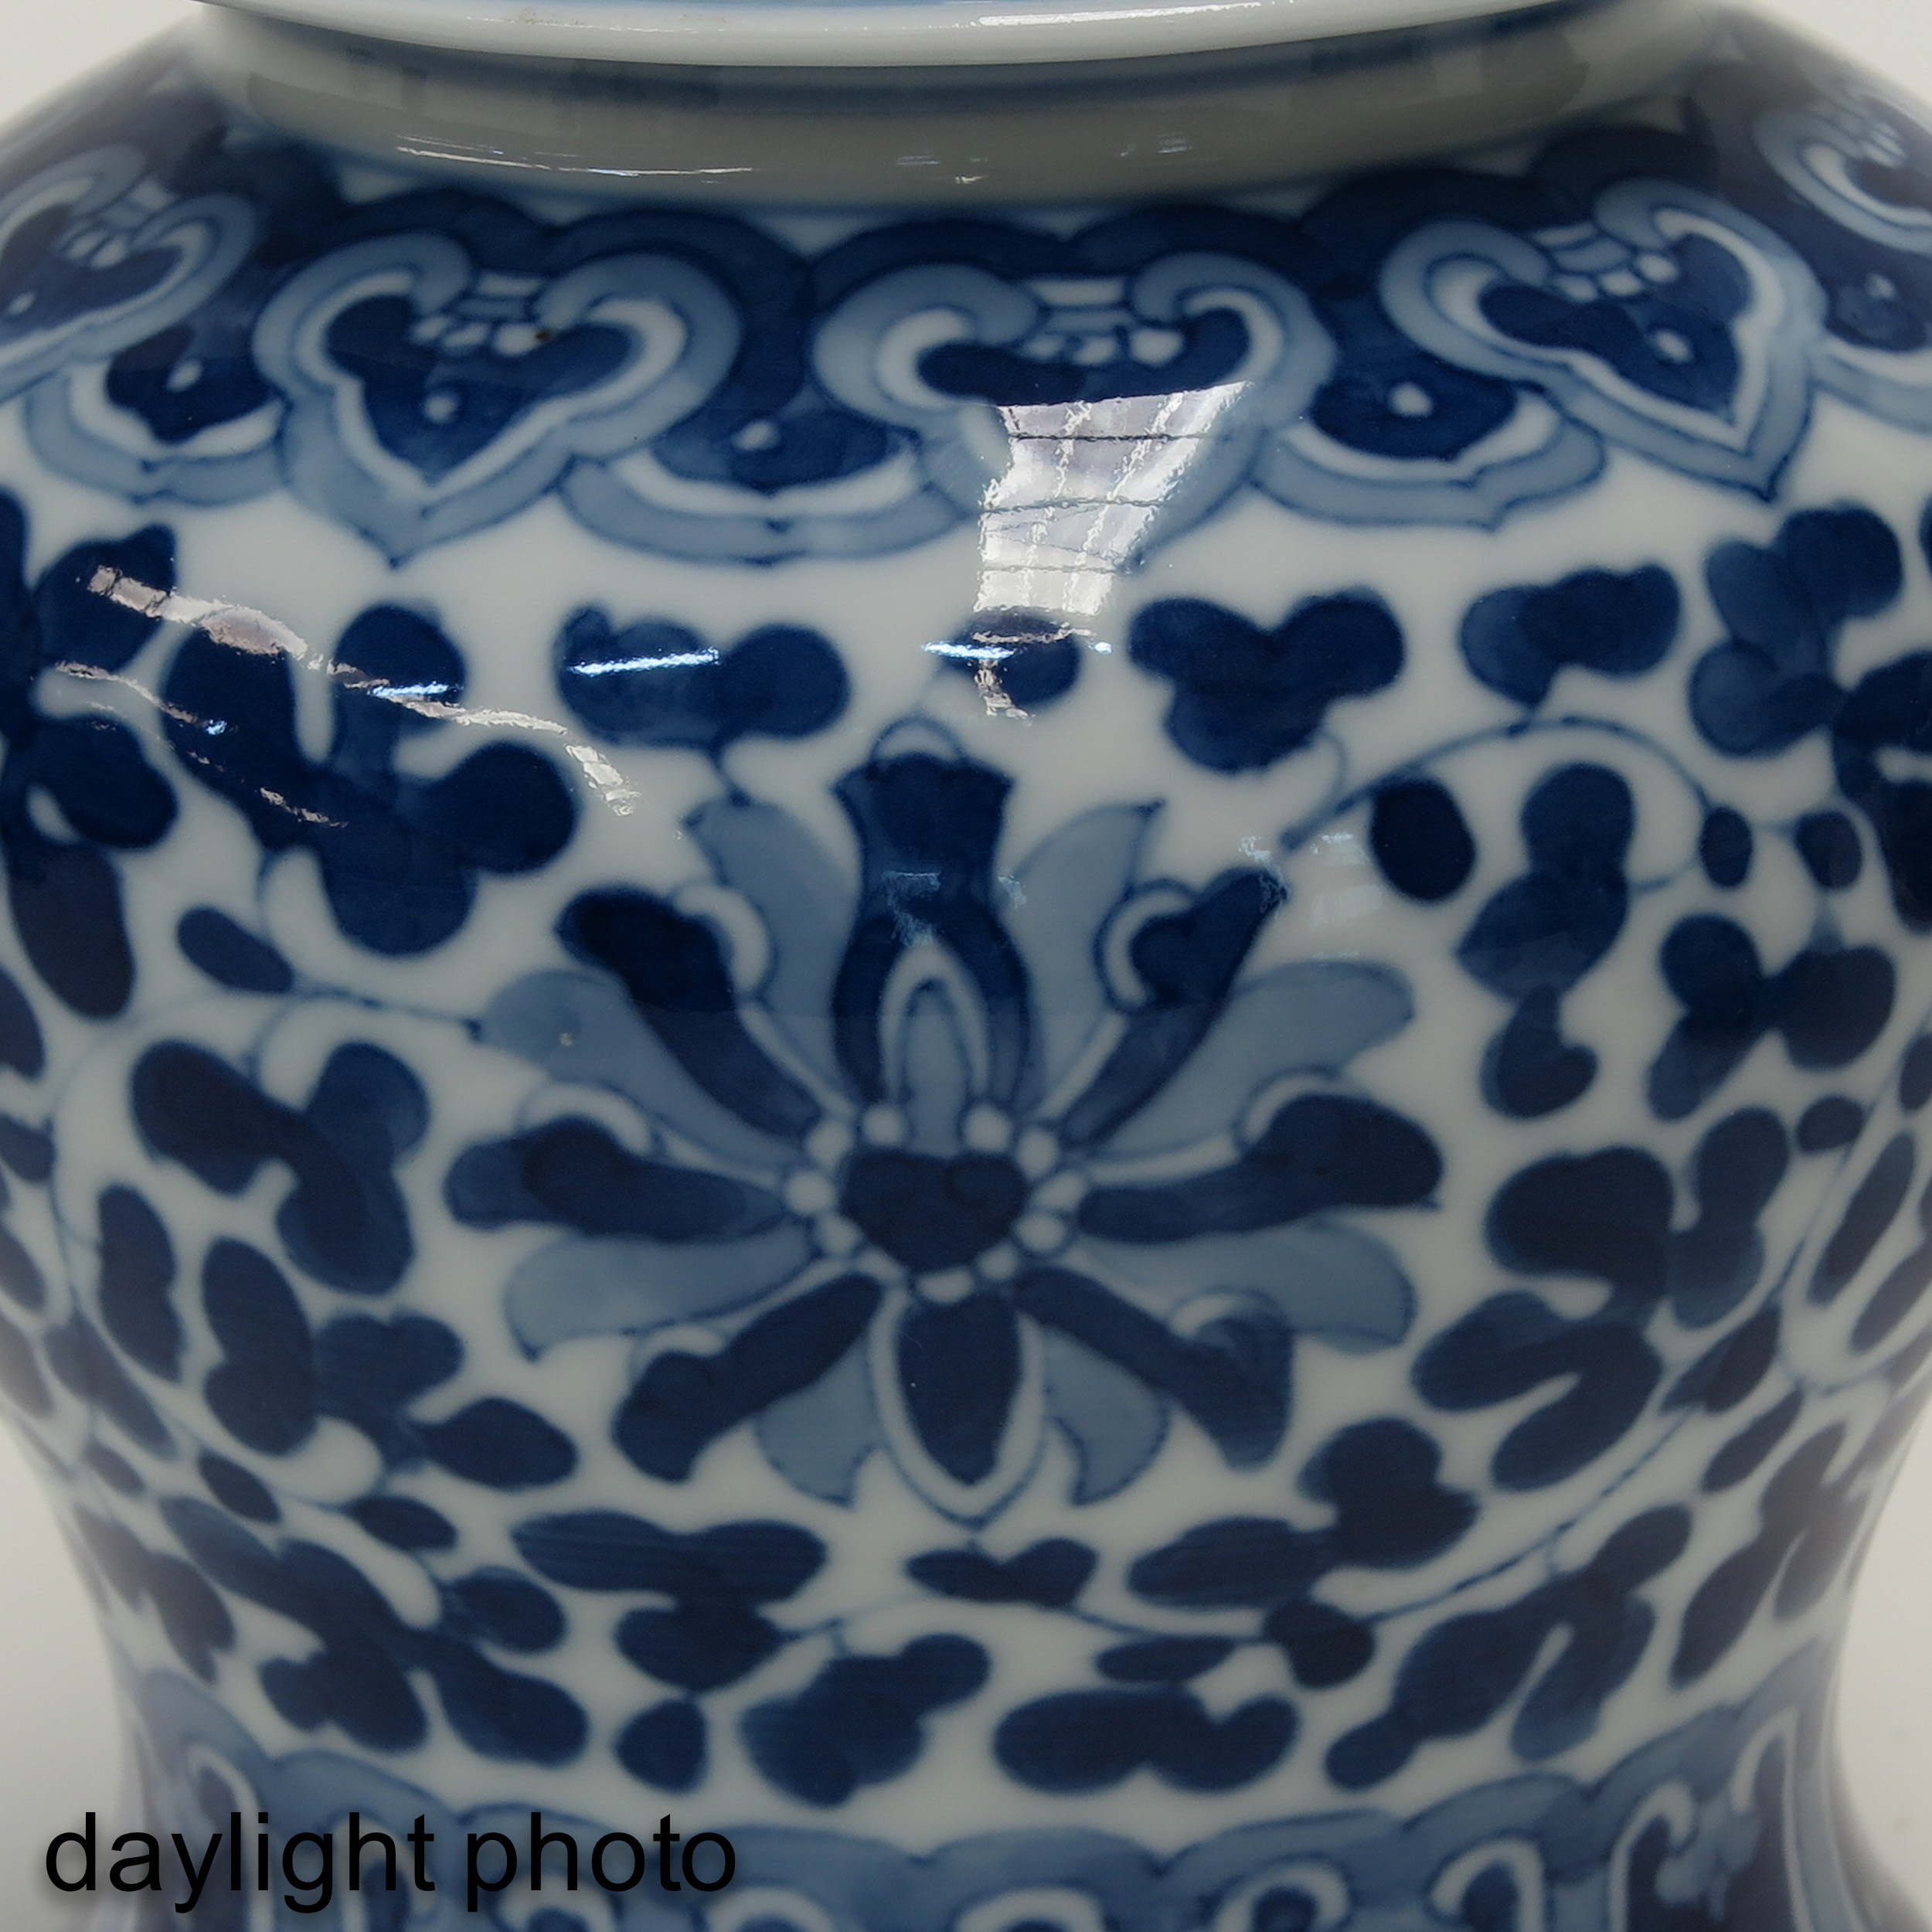 A Diverse Collection of Porcelain - Image 9 of 10